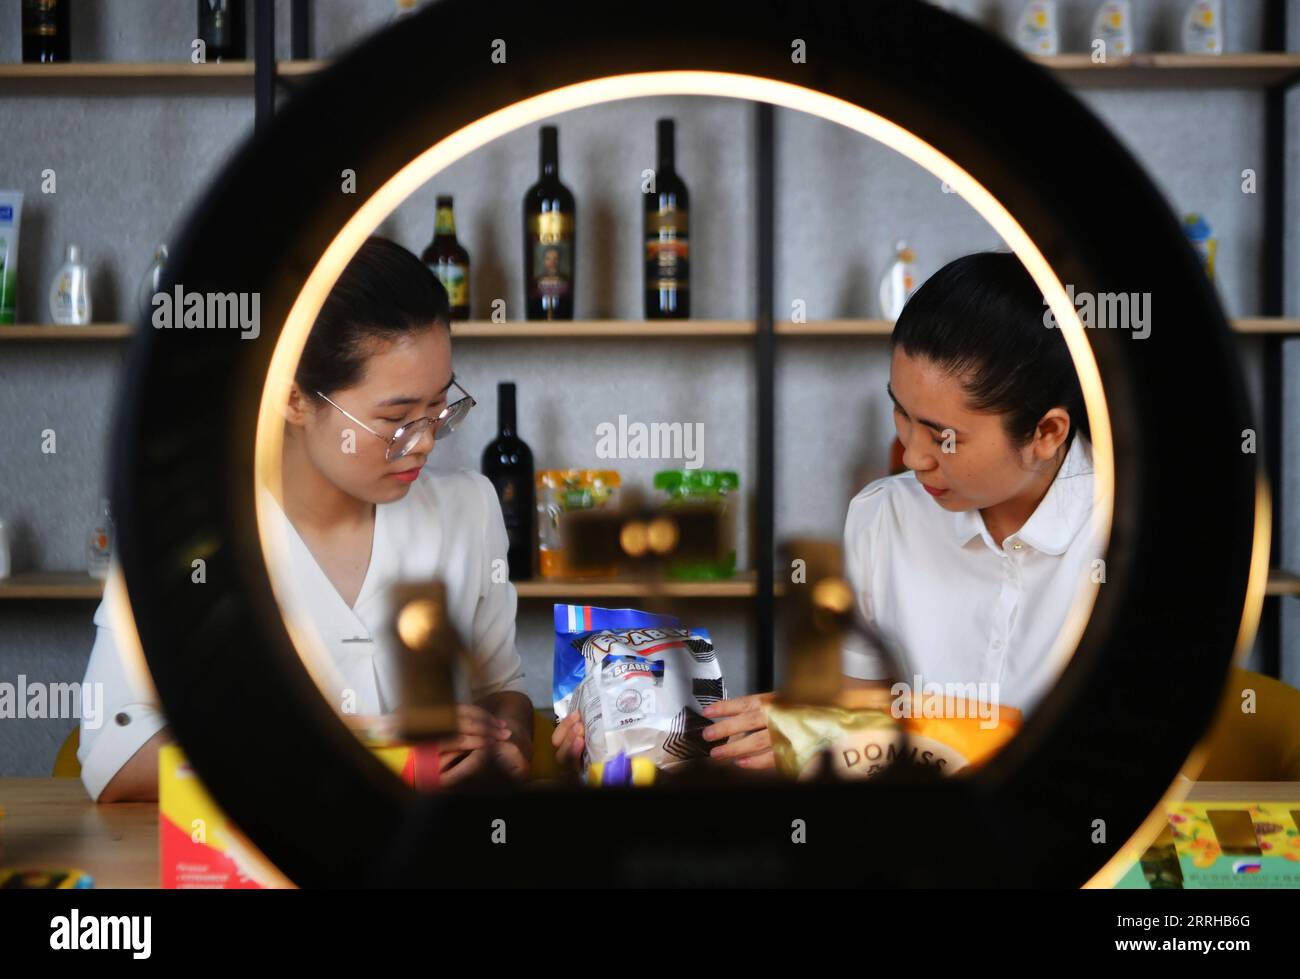 220624 -- XIAMEN, June 24, 2022 -- Staff members sell products via live streaming at the commodity service center for products of the BRICS countries in Xiamen City, southeast China s Fujian Province, June 23, 2022. The service center has been set up at Xiamen Cross-border E-commerce Industrial Park, with over 700 products displayed and sold. In recent years, Xiamen has expanded its trade cooperation with the other BRICS countries. Between January and May this year, Xiamen s import and export volume to BRICS countries recorded 28.34 billion yuan about 4.23 billion U.S. dollars.  CHINA-FUJIAN-X Stock Photo